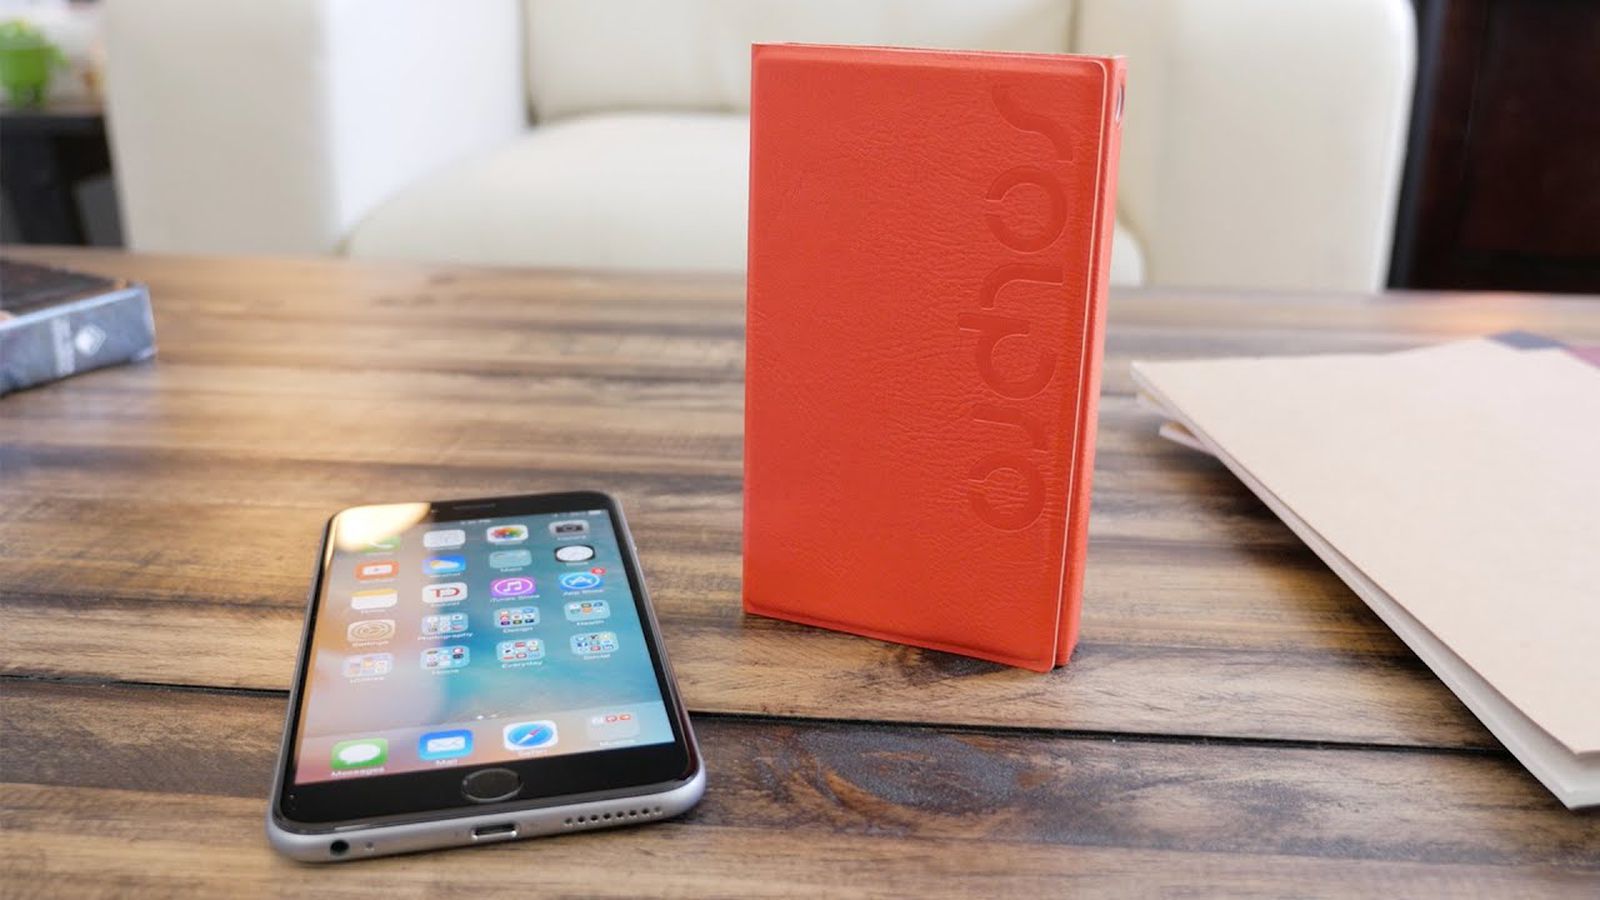 Video Review: The Solpro Helios Smart Battery Pack Charges Your iPhone Using the Sun